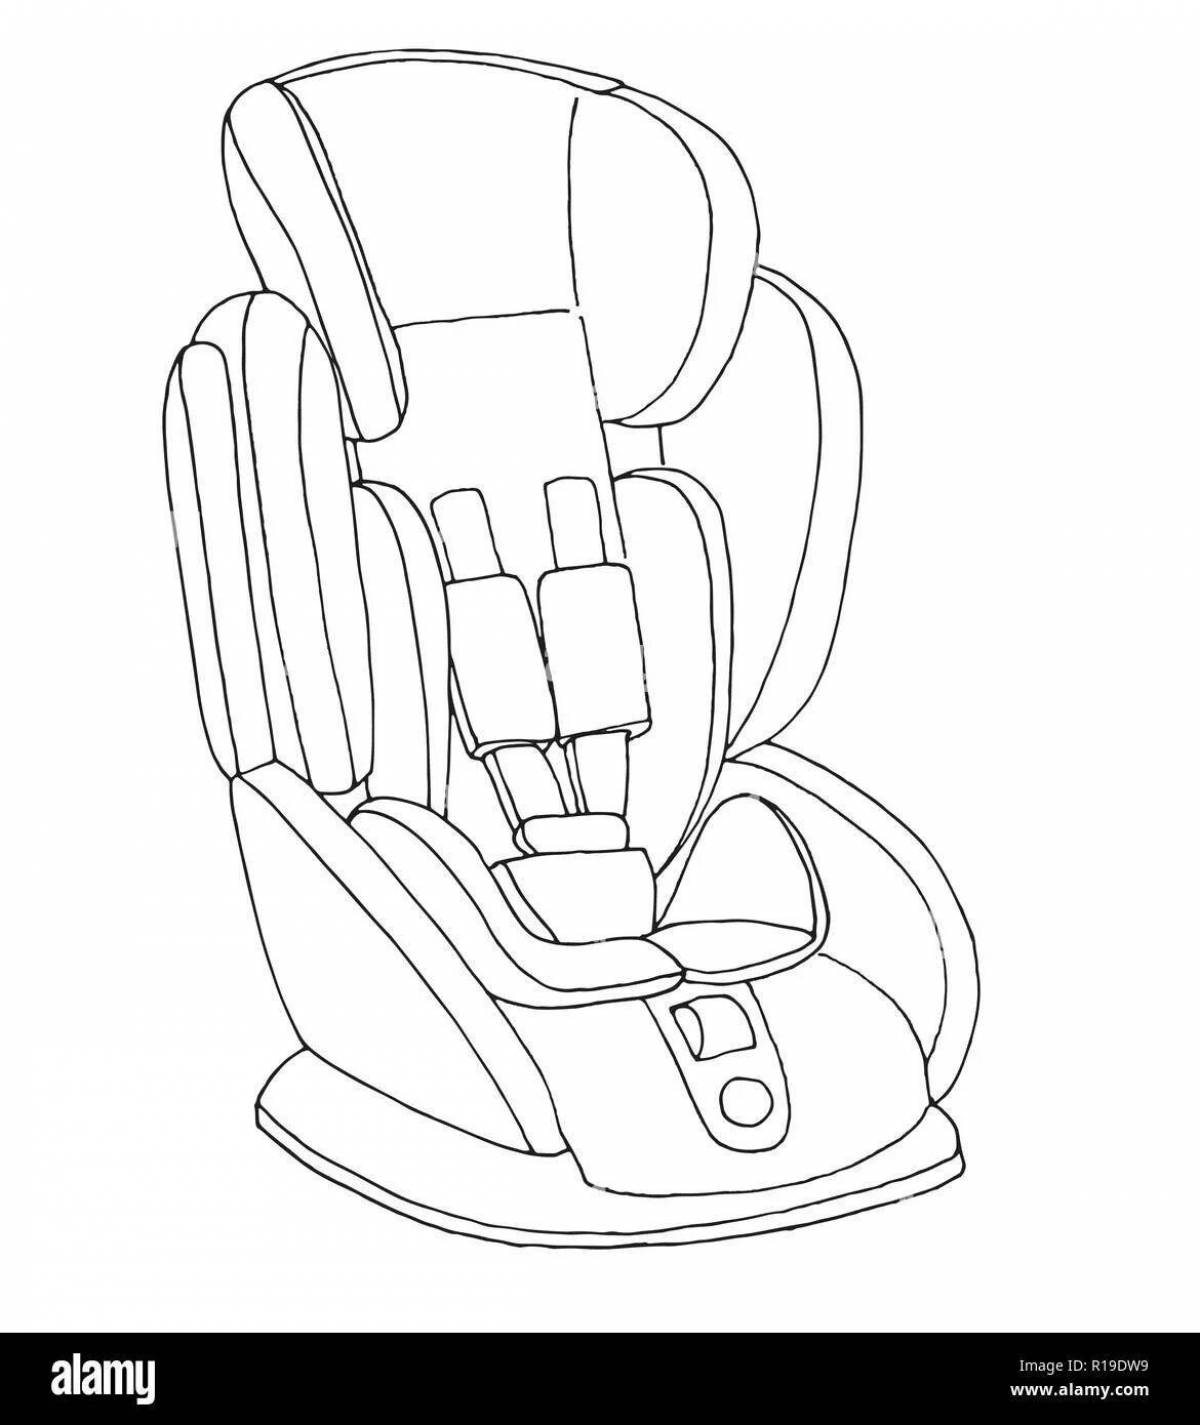 Playful child in car seat